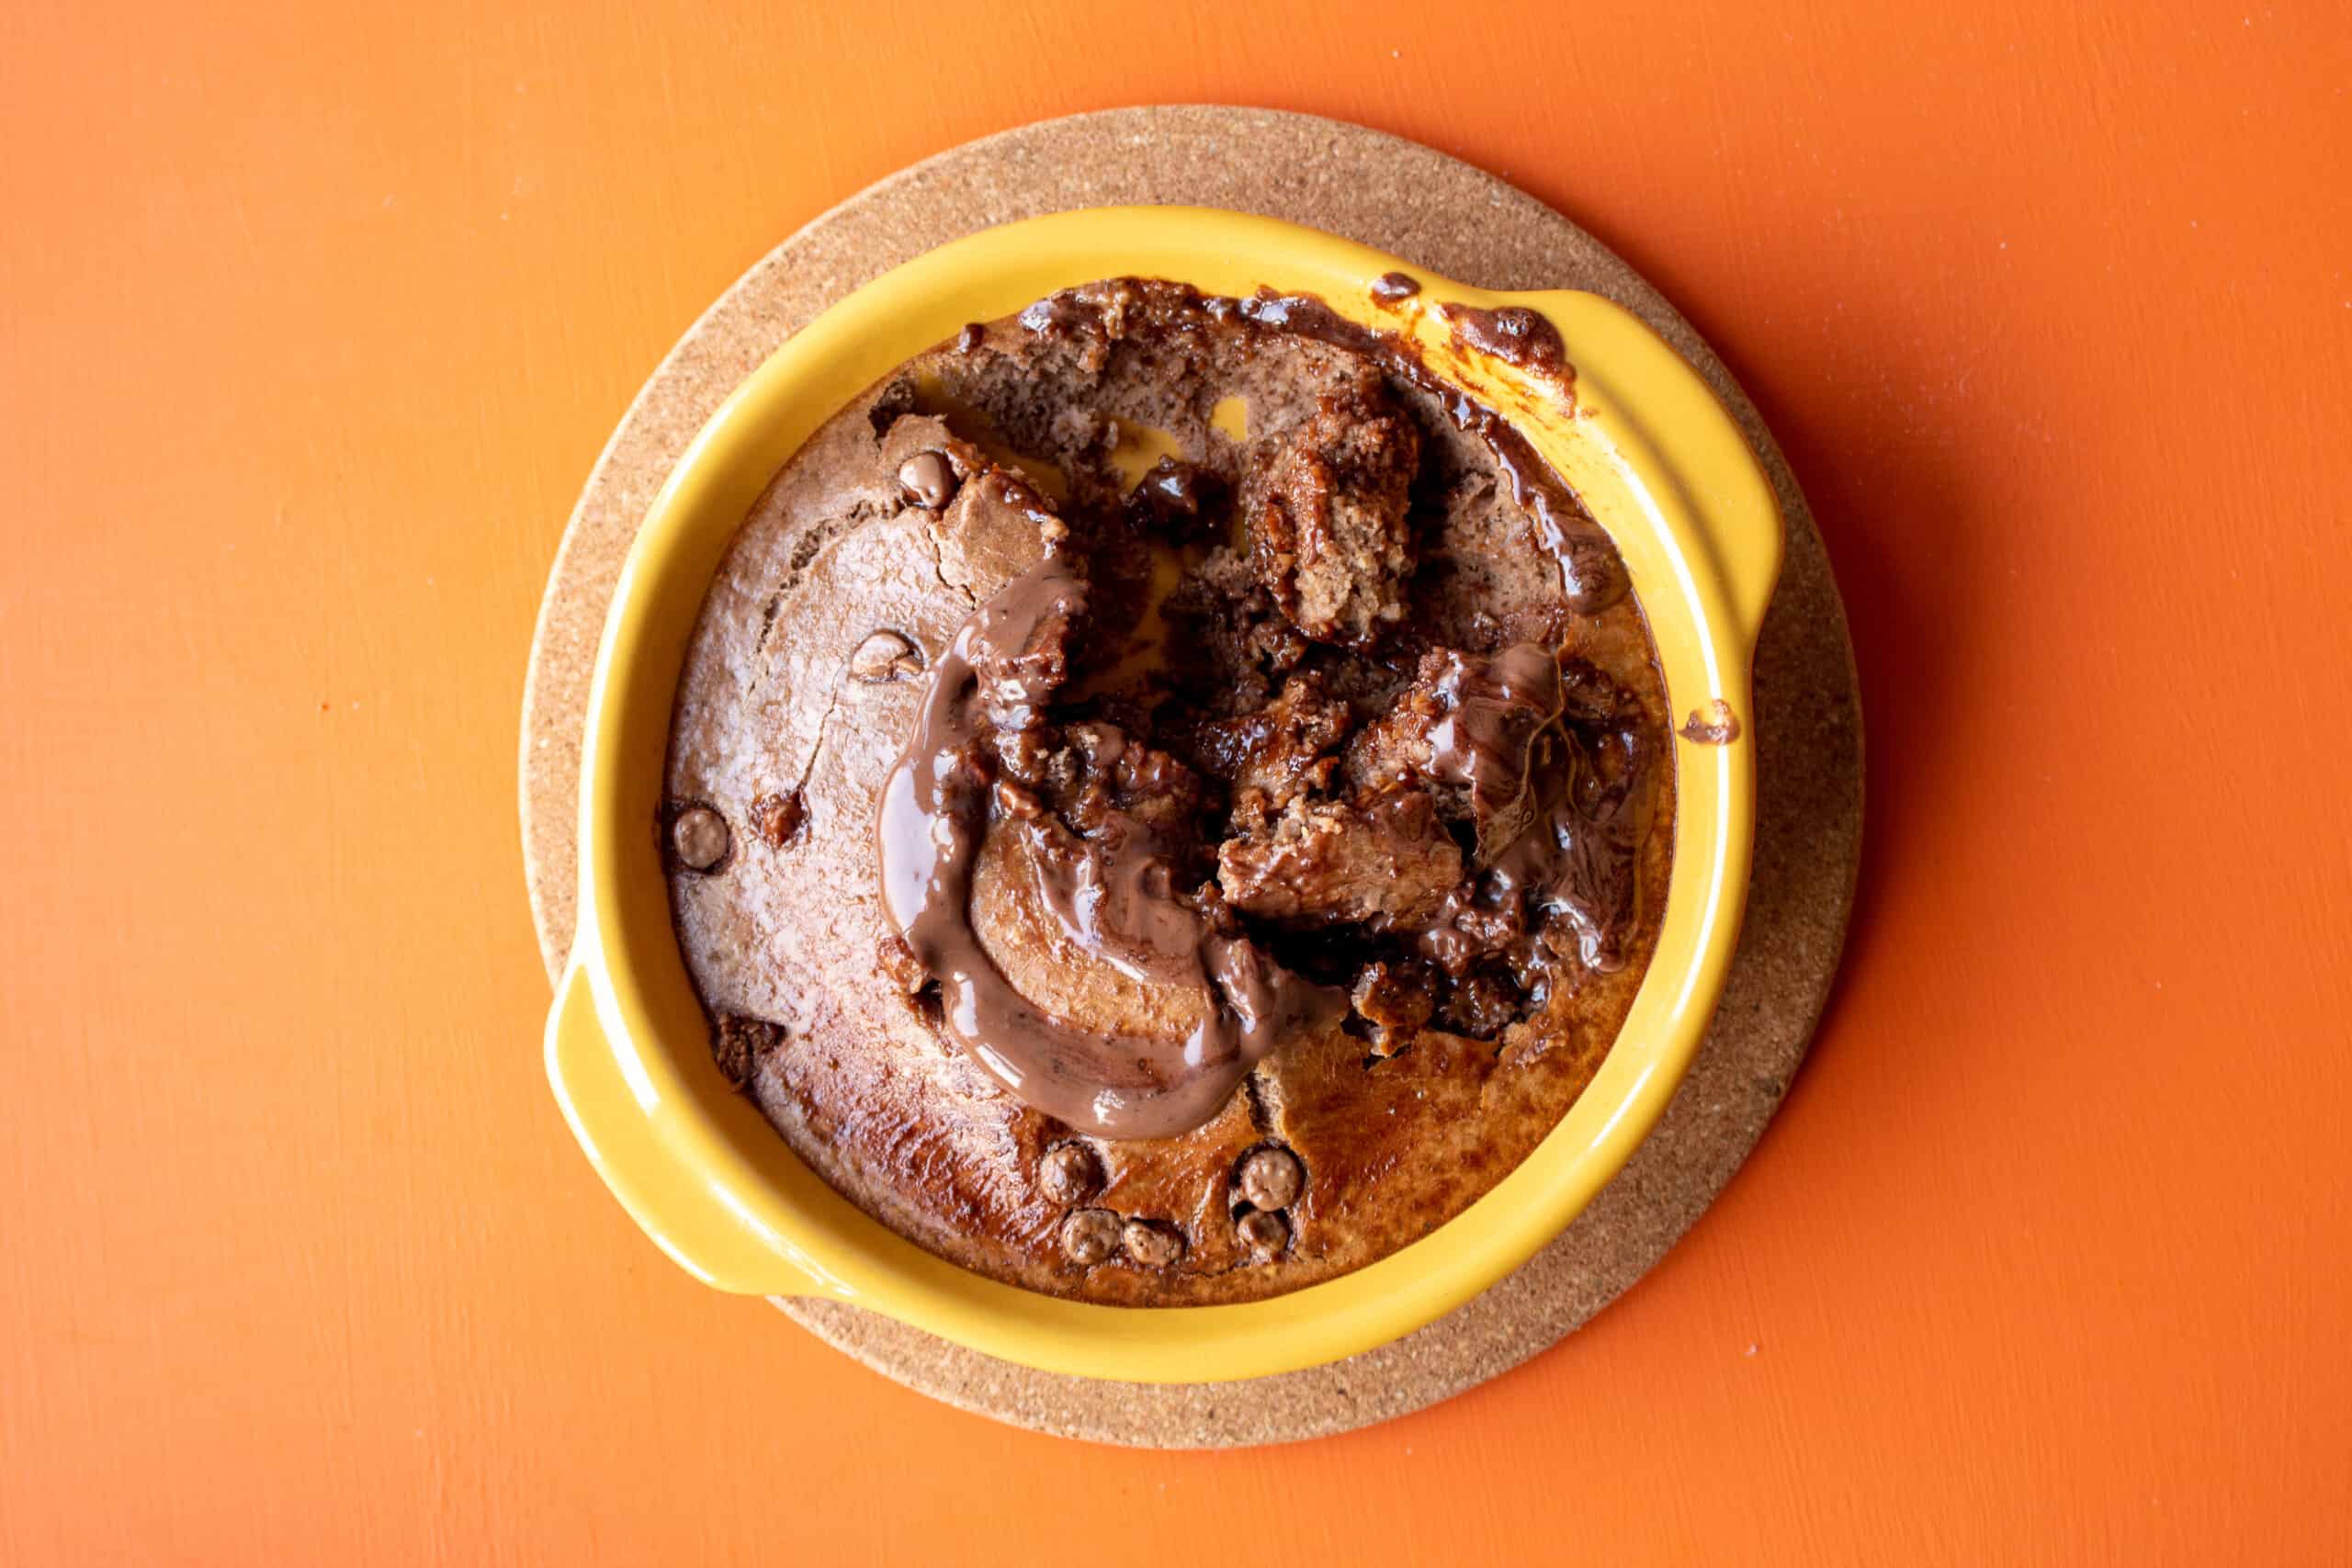 Nutella baked oats with a spoon full from the middle eaten